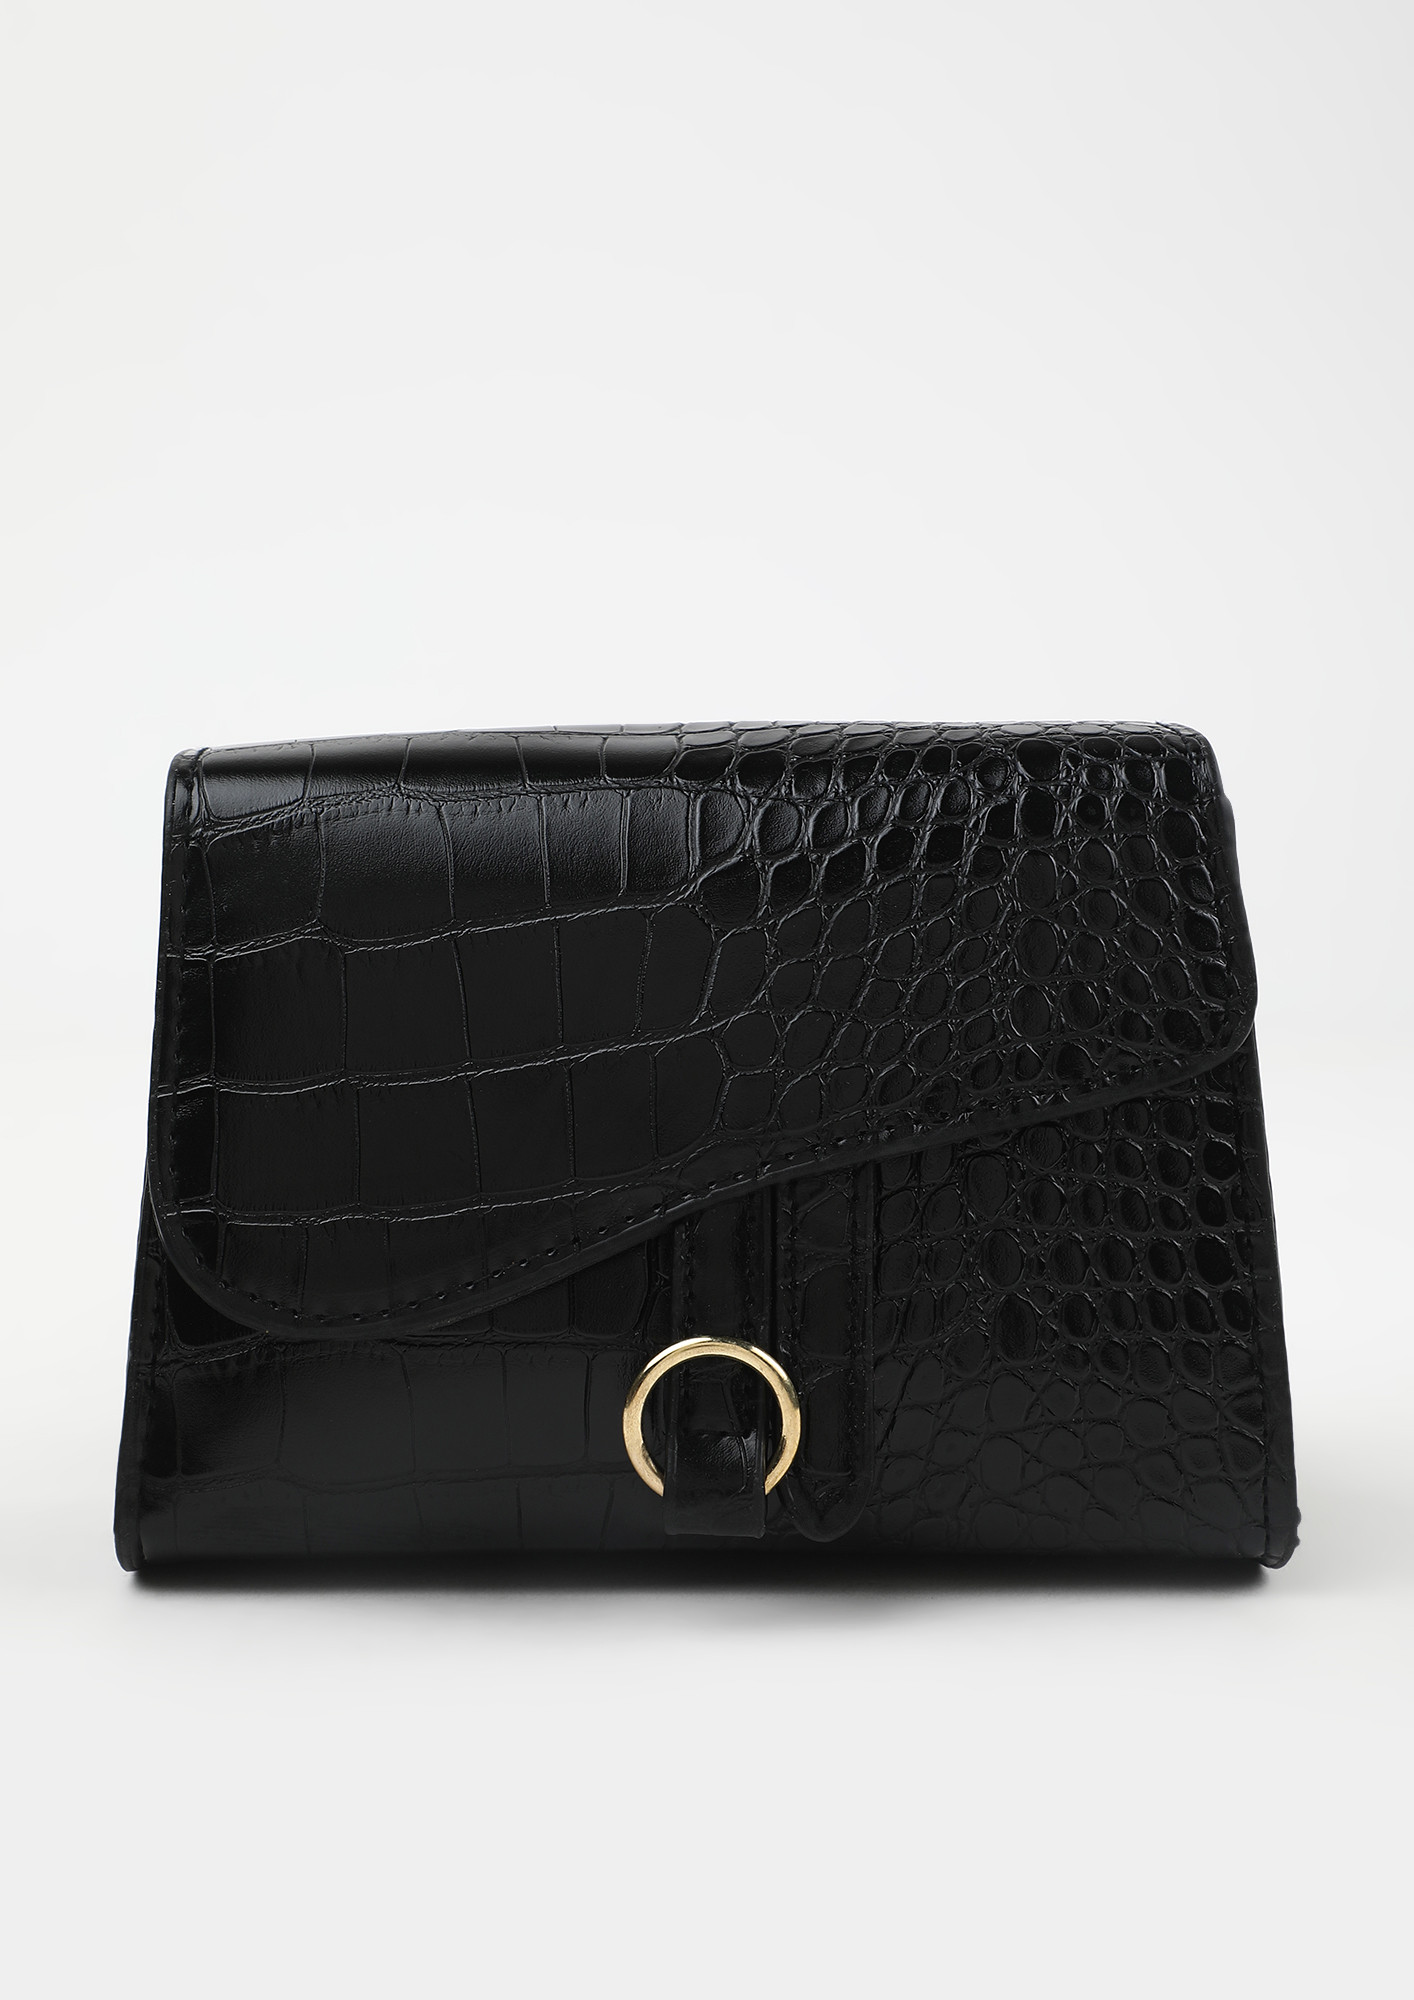 POSH AND SPICY BLACK SLING BAG